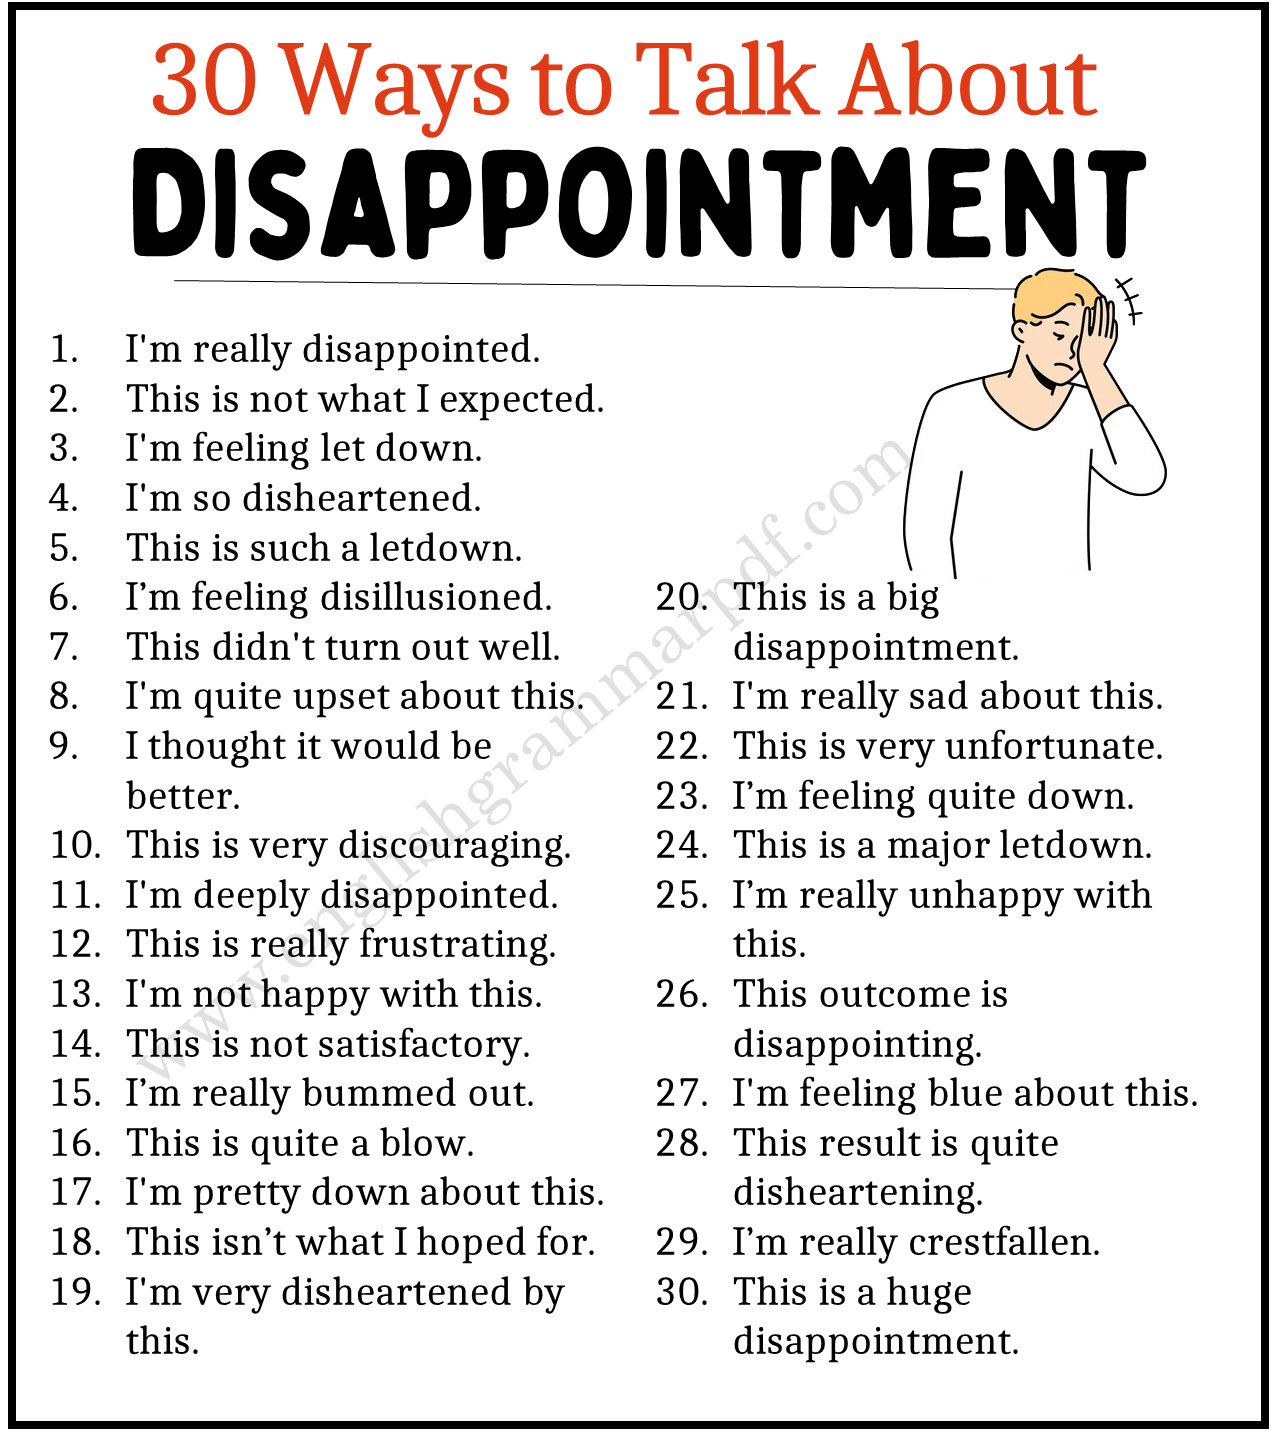 Ways to Talk about Disappointment